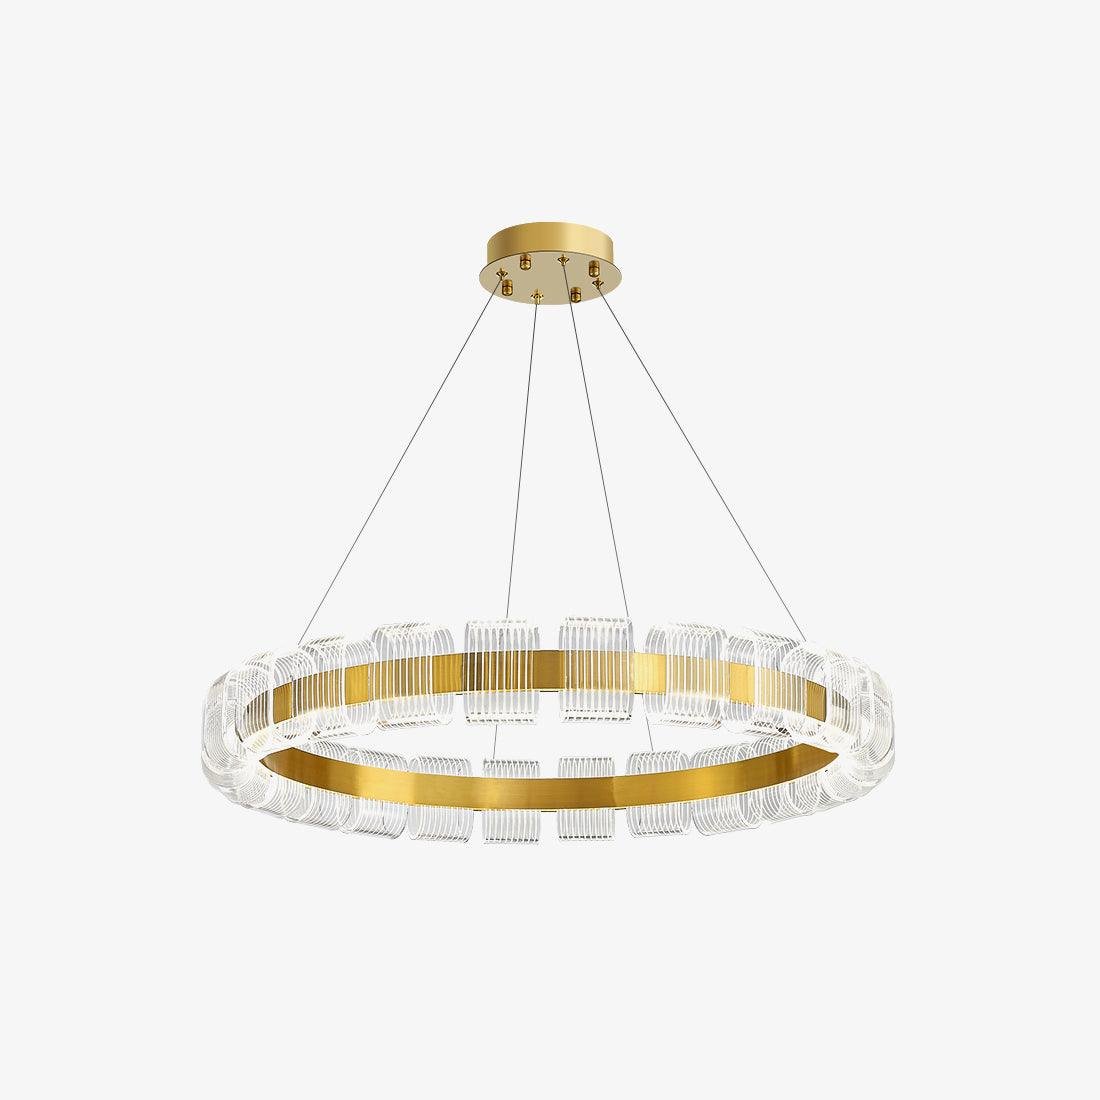 Chandelier Bangle in Gold and Clear Design, with a Diameter of 23.6 inches and a Height of 4.7 inches (60cm x 12cm), Emitting a Cool Light.